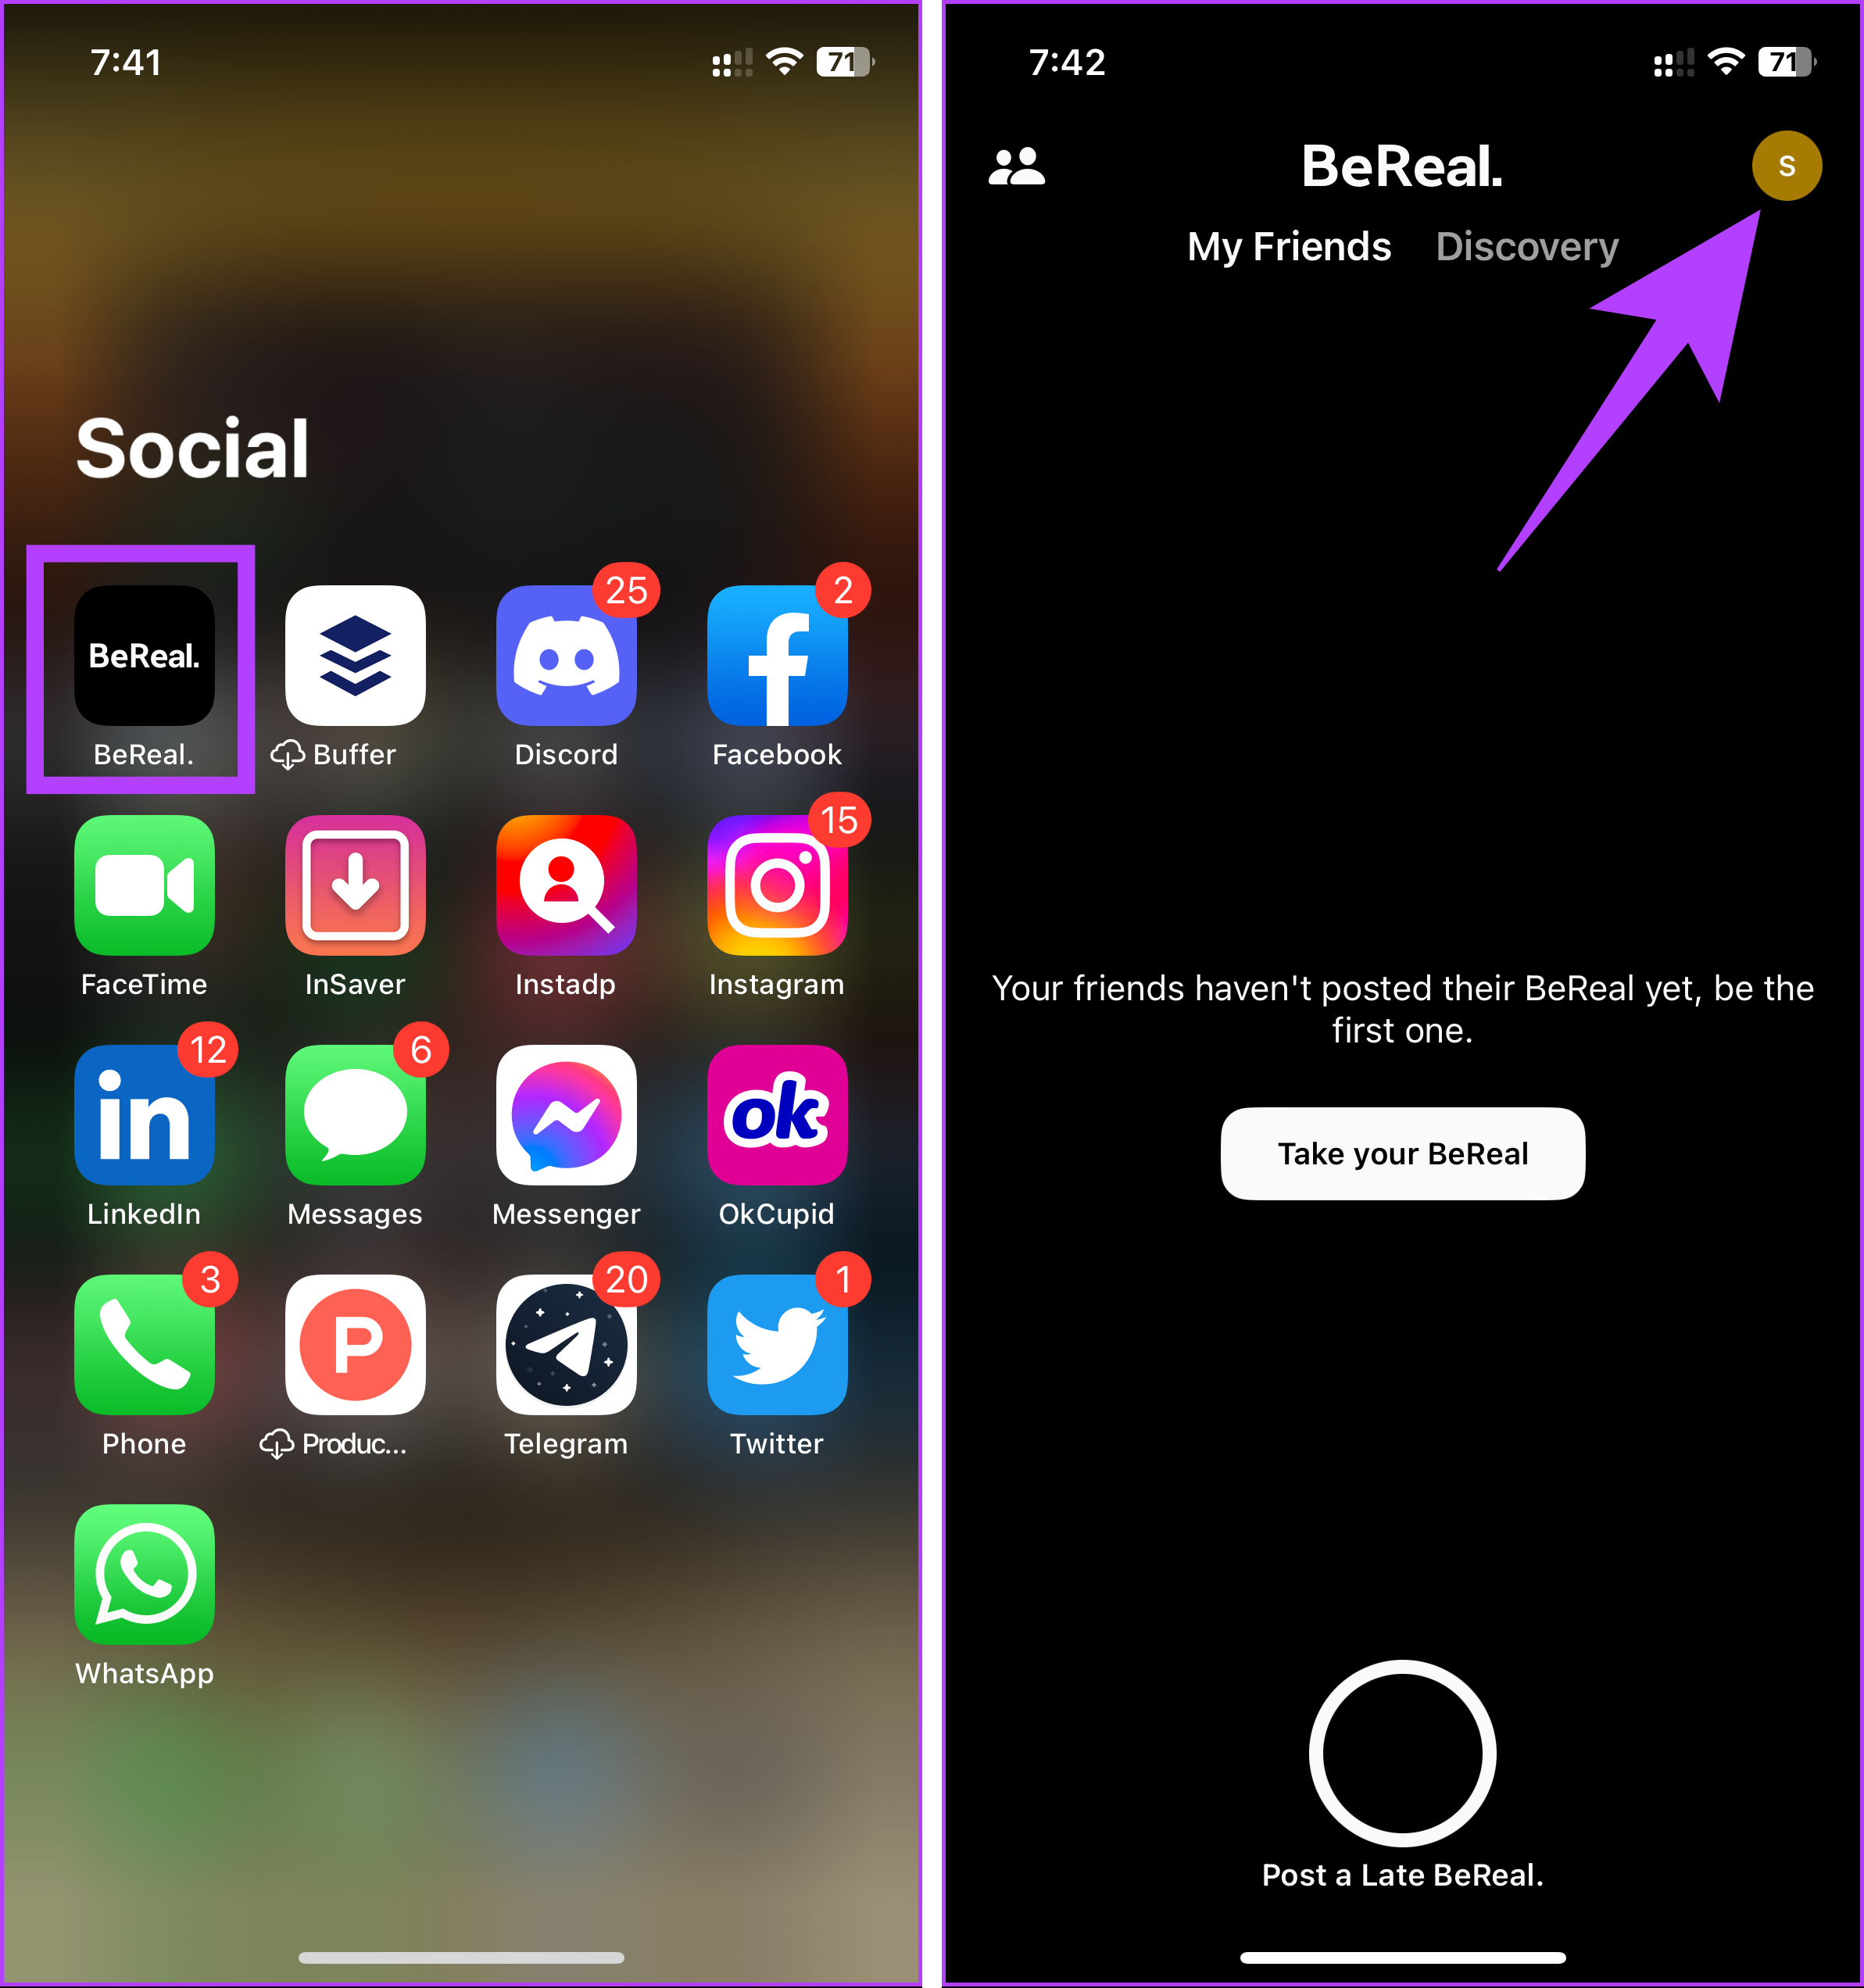 Launch BeReal on your iPhone